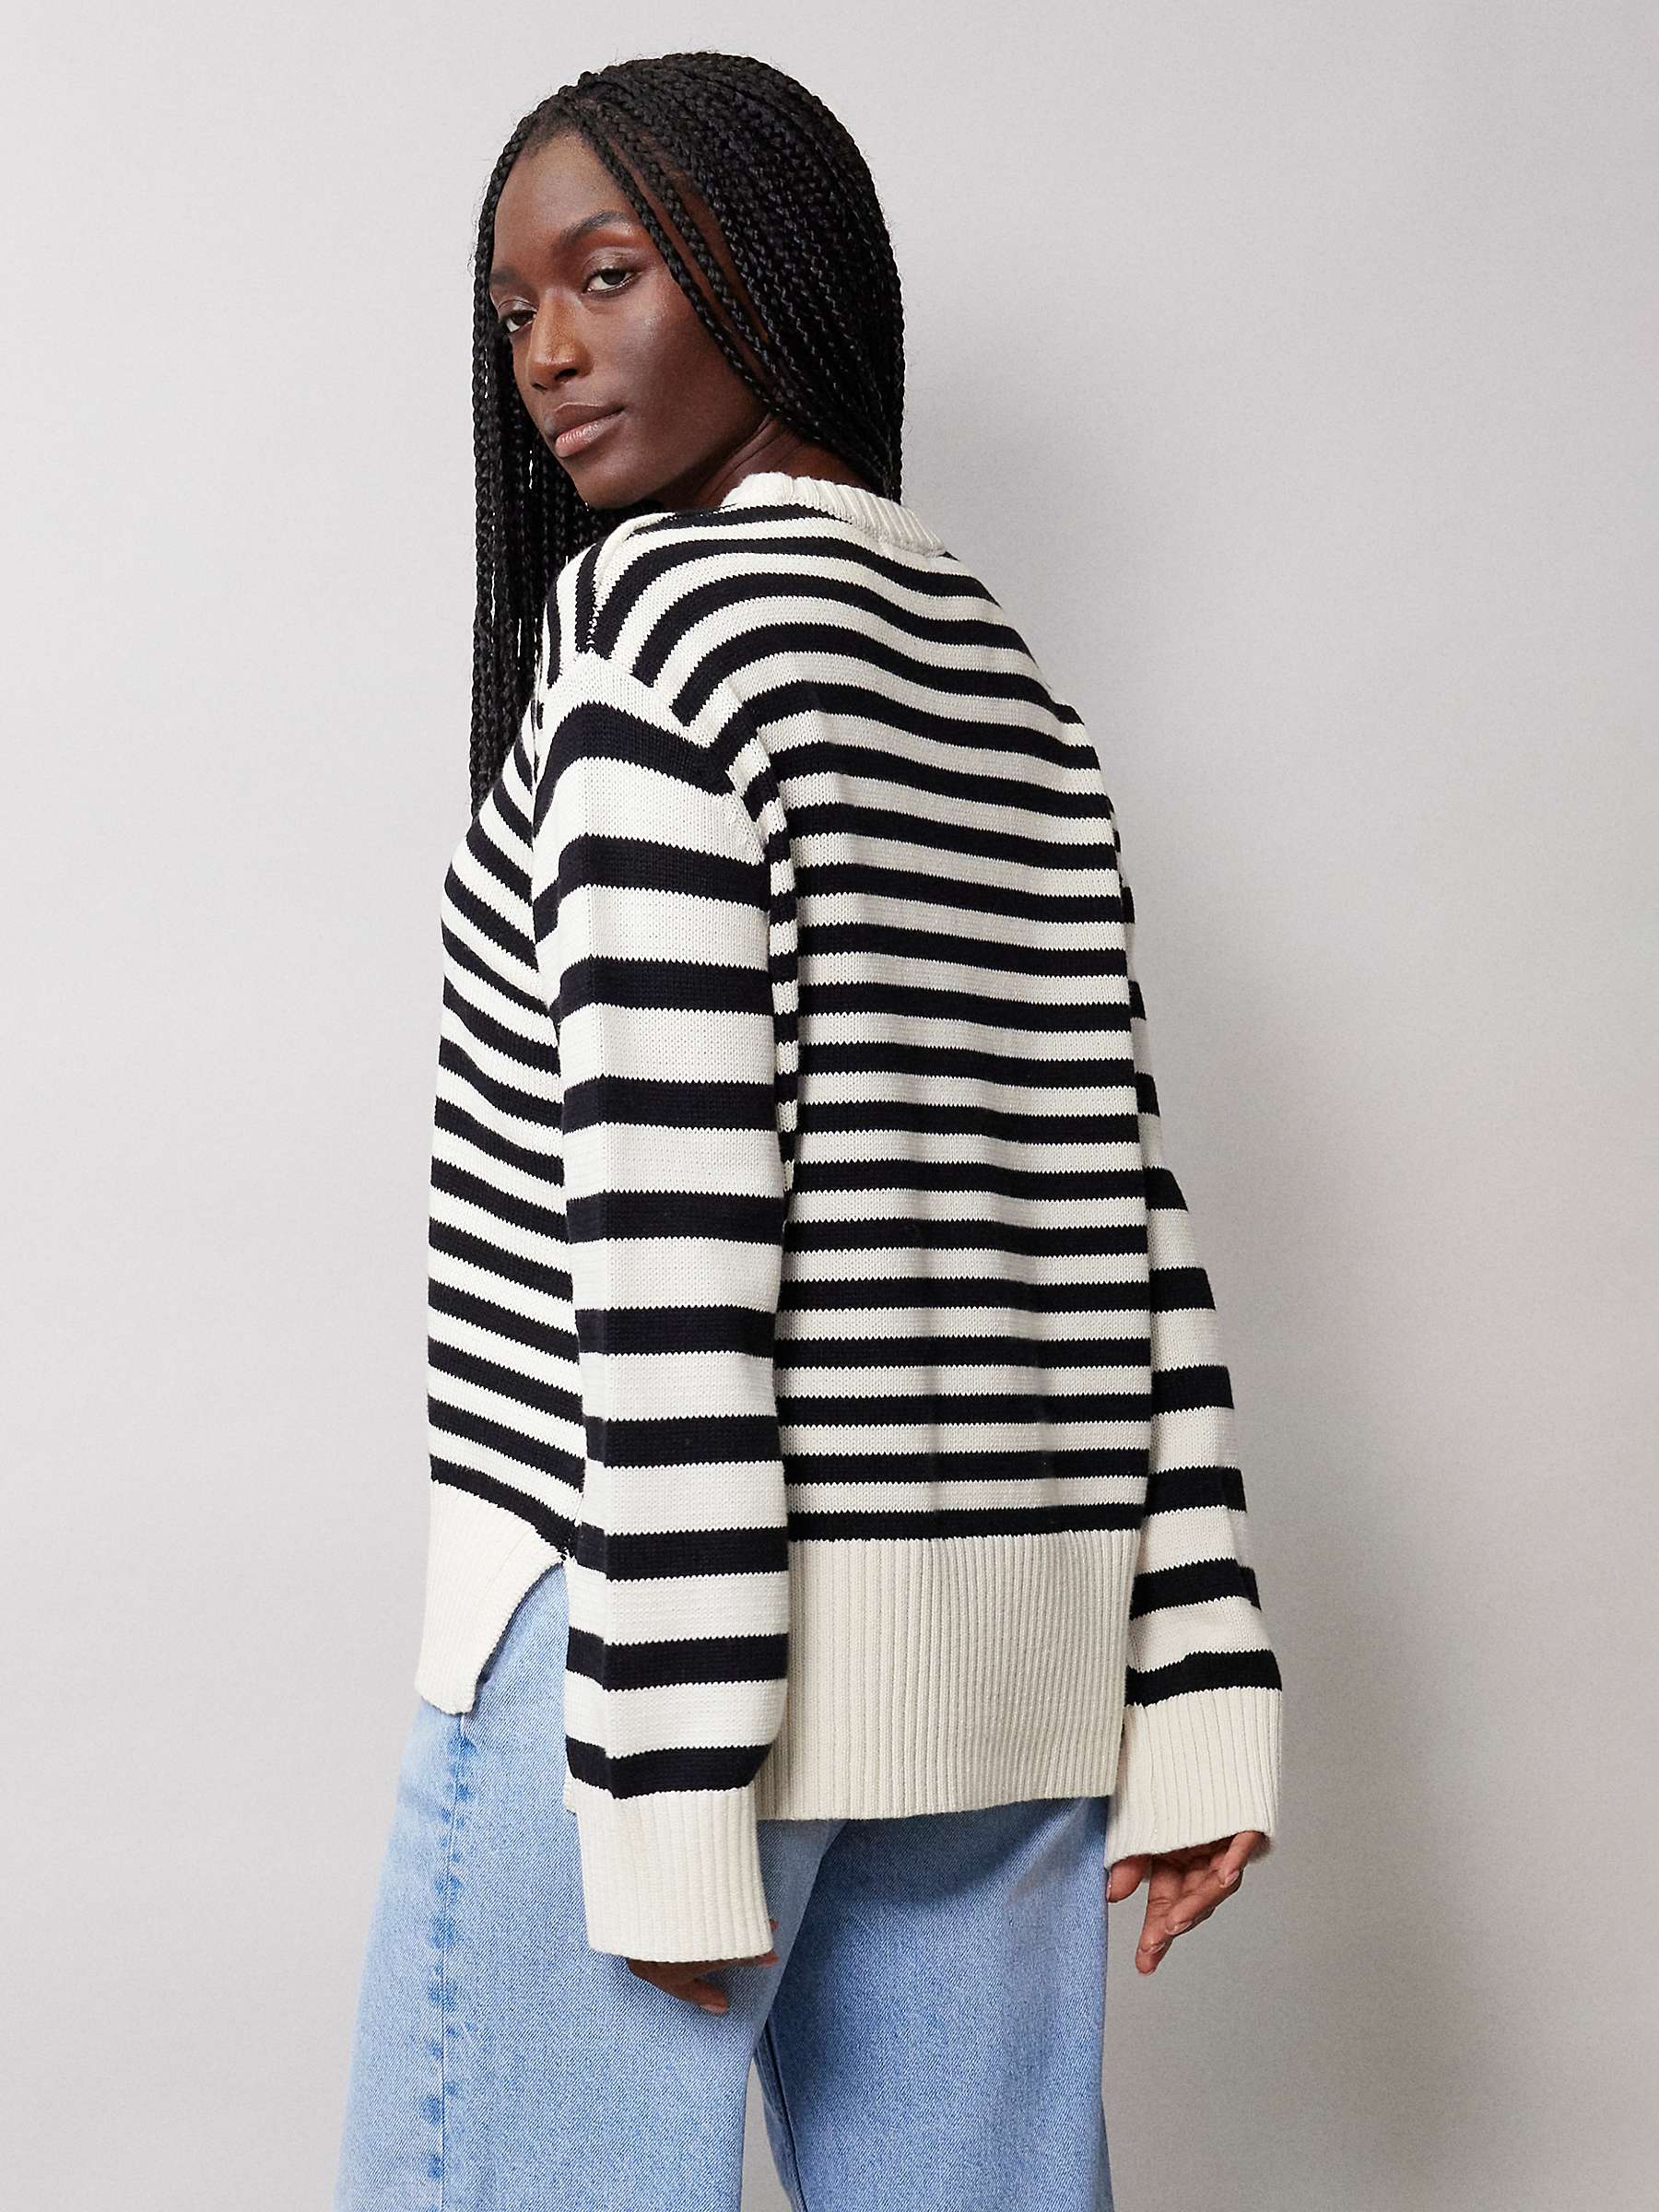 Buy Albaray Relaxed Fit Striped Cotton Jumper, Black/Cream Online at johnlewis.com